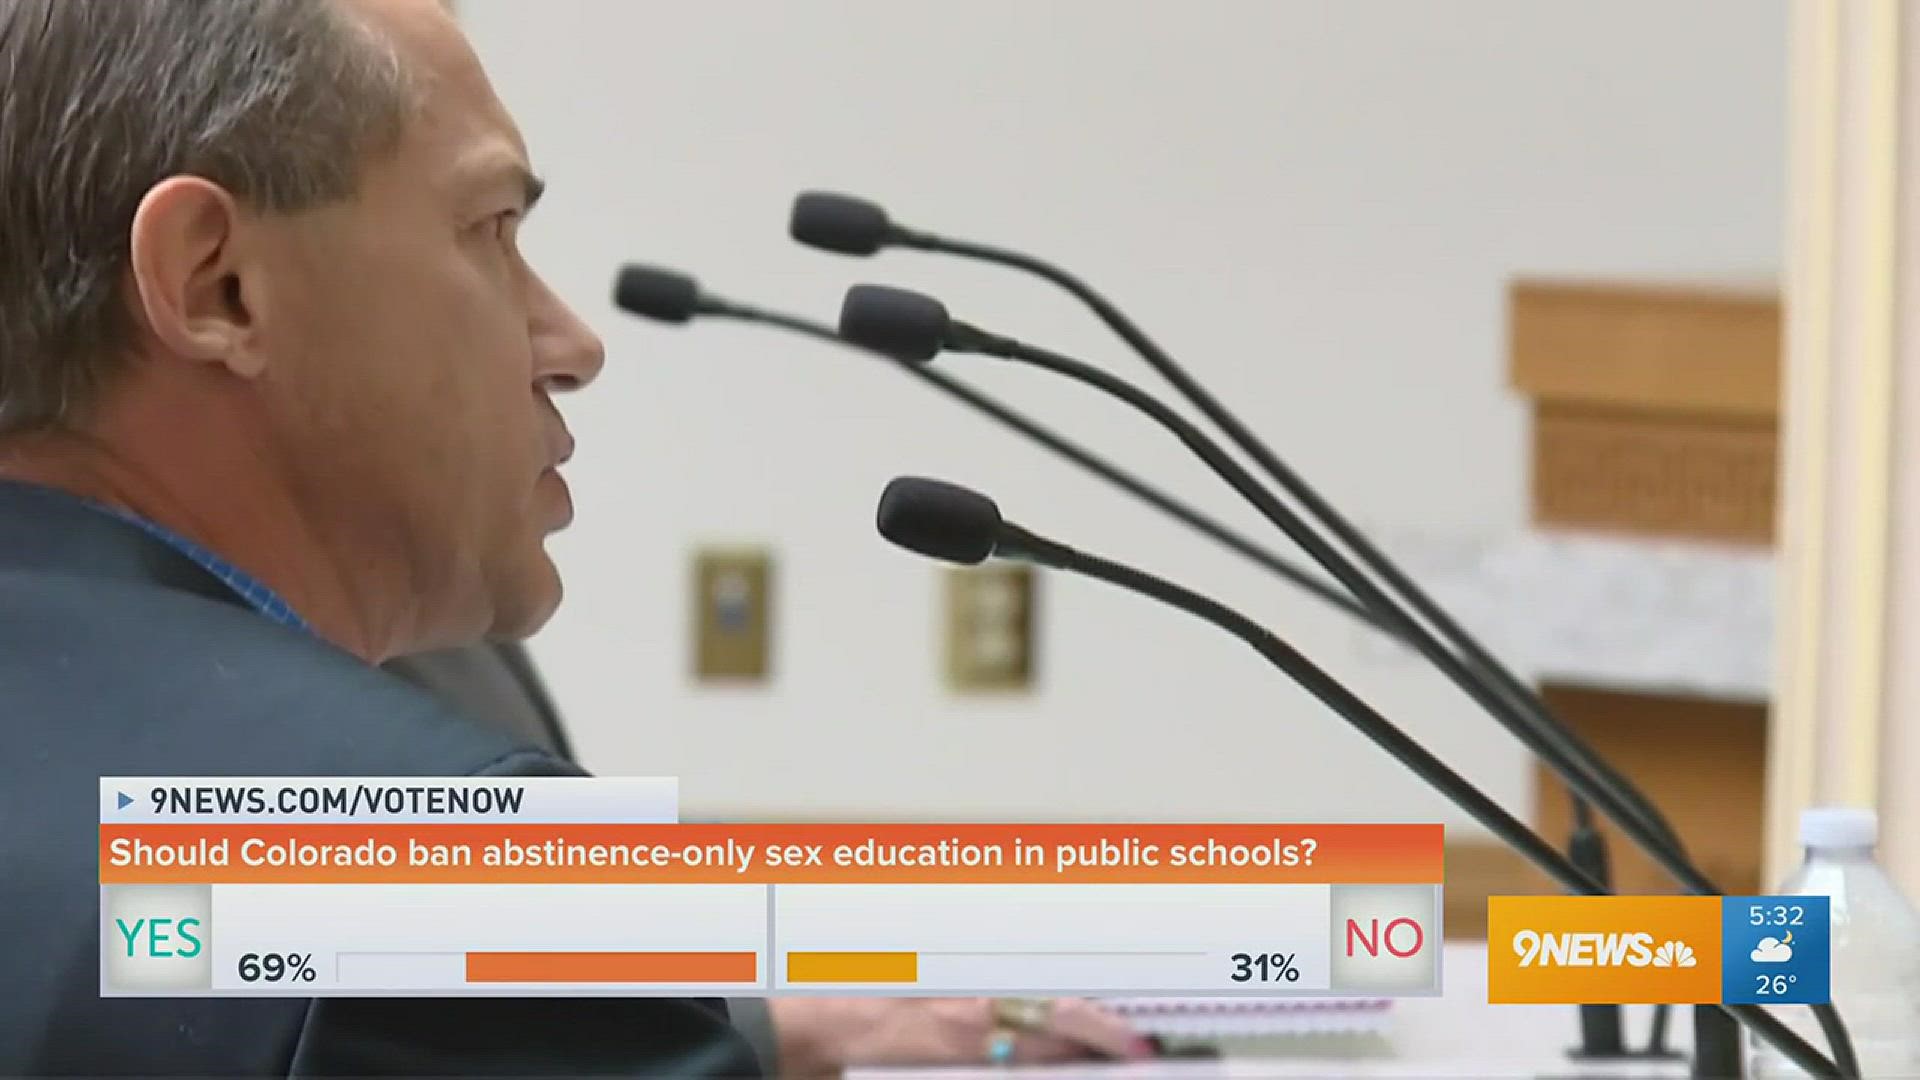 With sexual education reform becoming A fiercely debated topic at the state capital, the 9news morning team asks viewers if Colorado should ban abstinence-only sex education in schools.